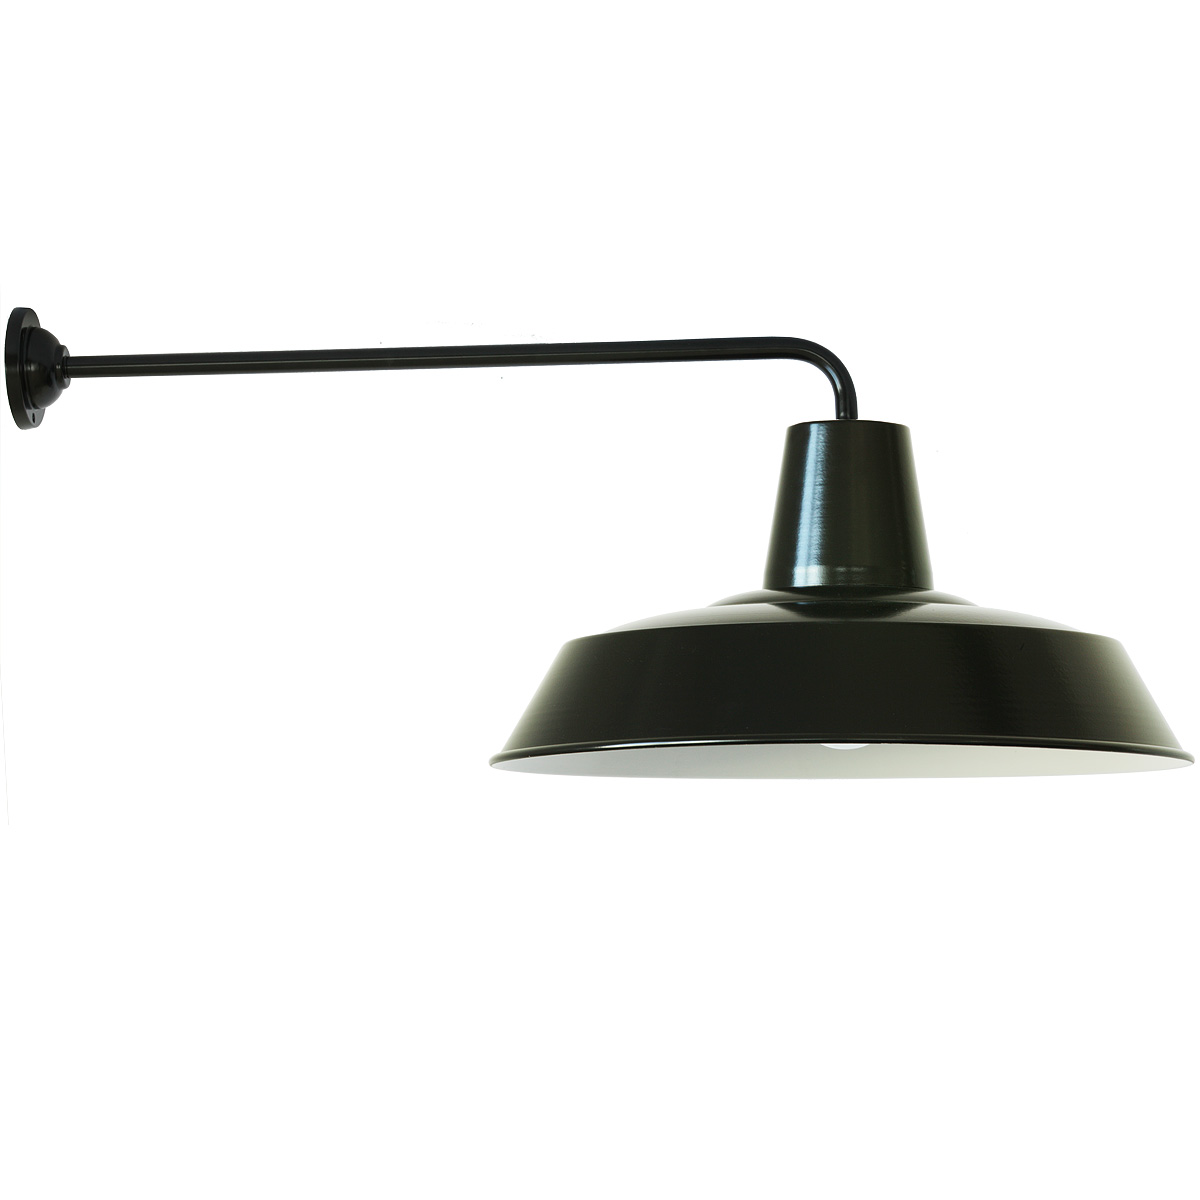 Outdoor wall light, industrial style with long bracket W390L (Ø 49 cm)